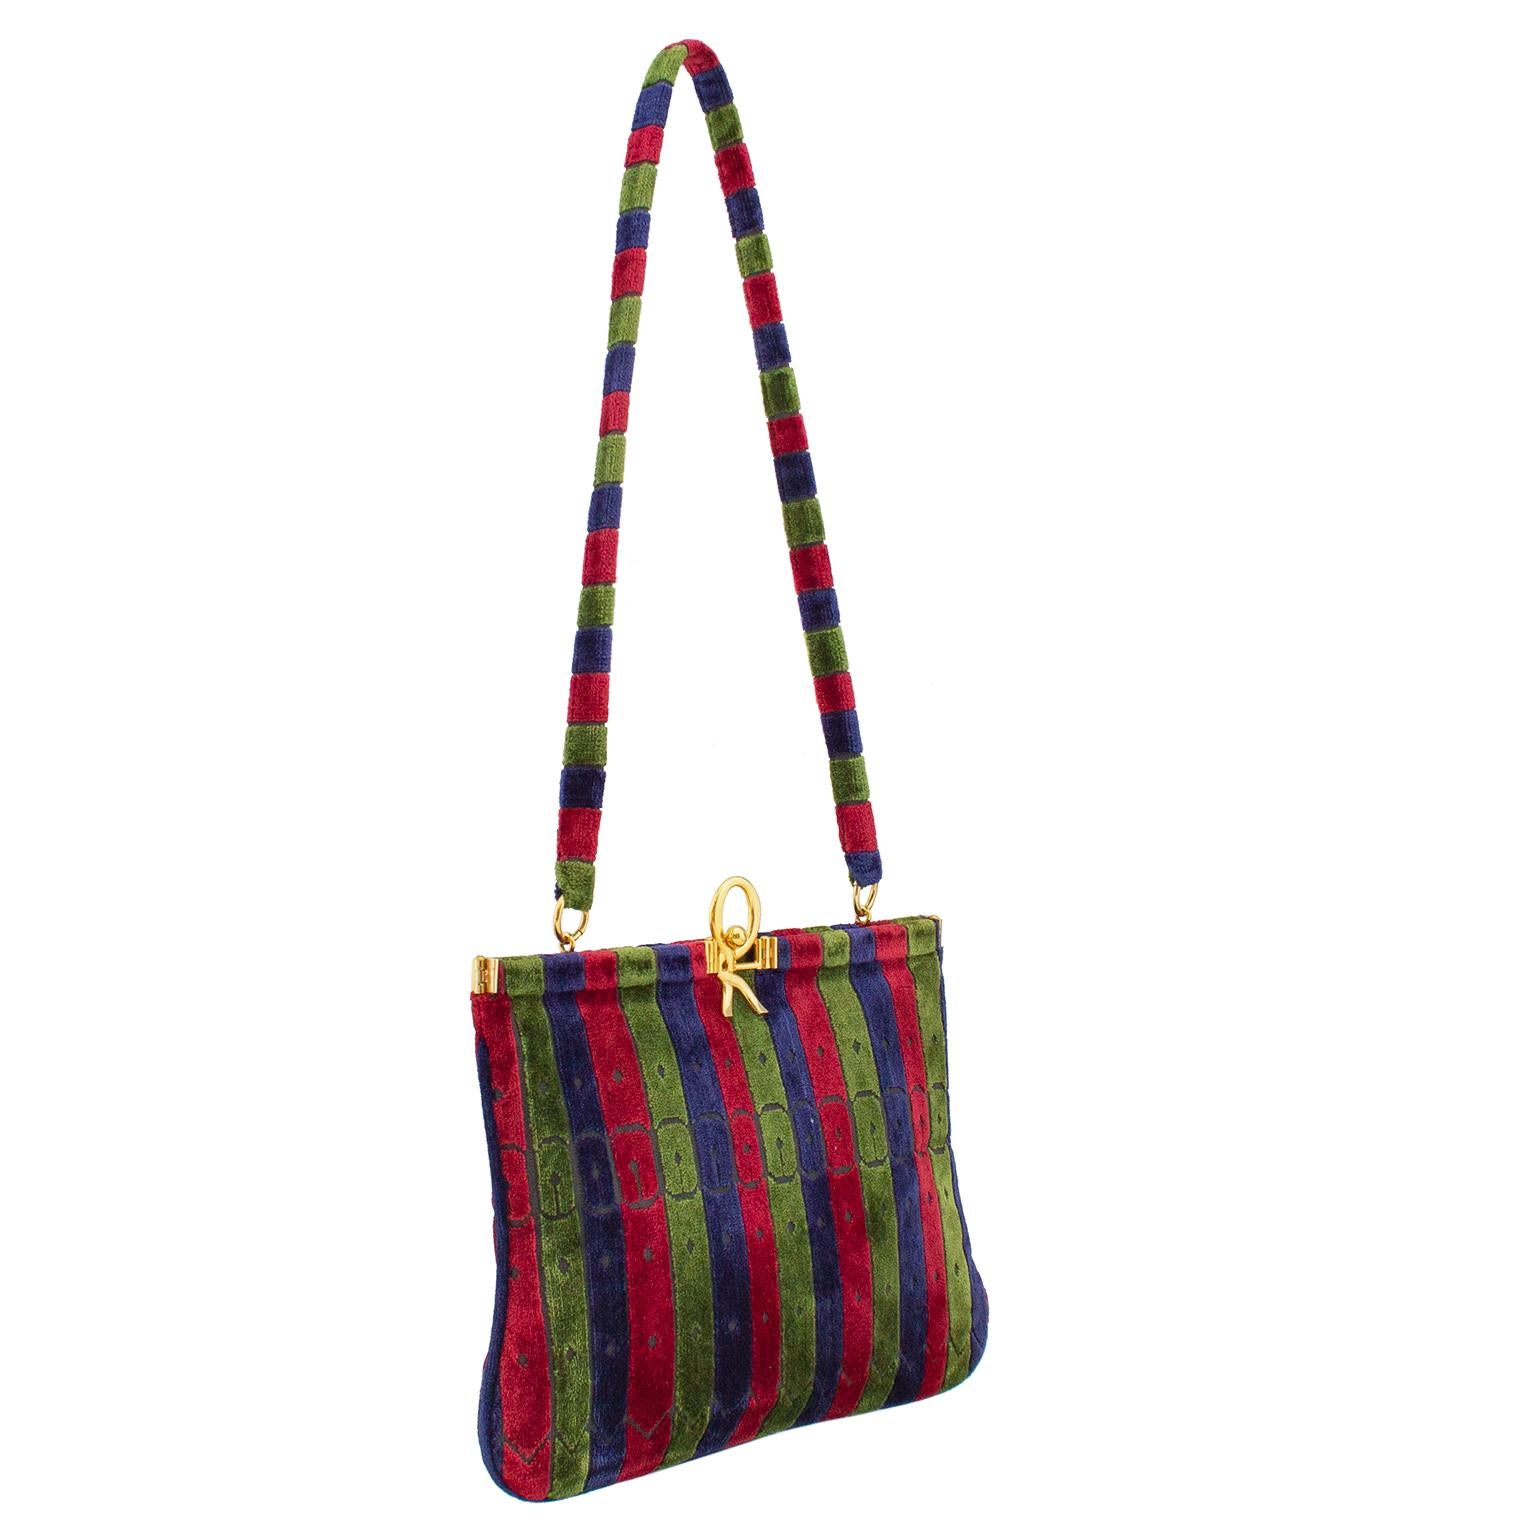 Gorgeous Roberta Di Camerino bag from the 1970s. Vertical stripes in the iconic Roberta Di Camerino jewel tone colours of red, green, and navy blue. Stripes also feature a trompe-l'œil illusion of watch bands. Gold tone hardware with a large R